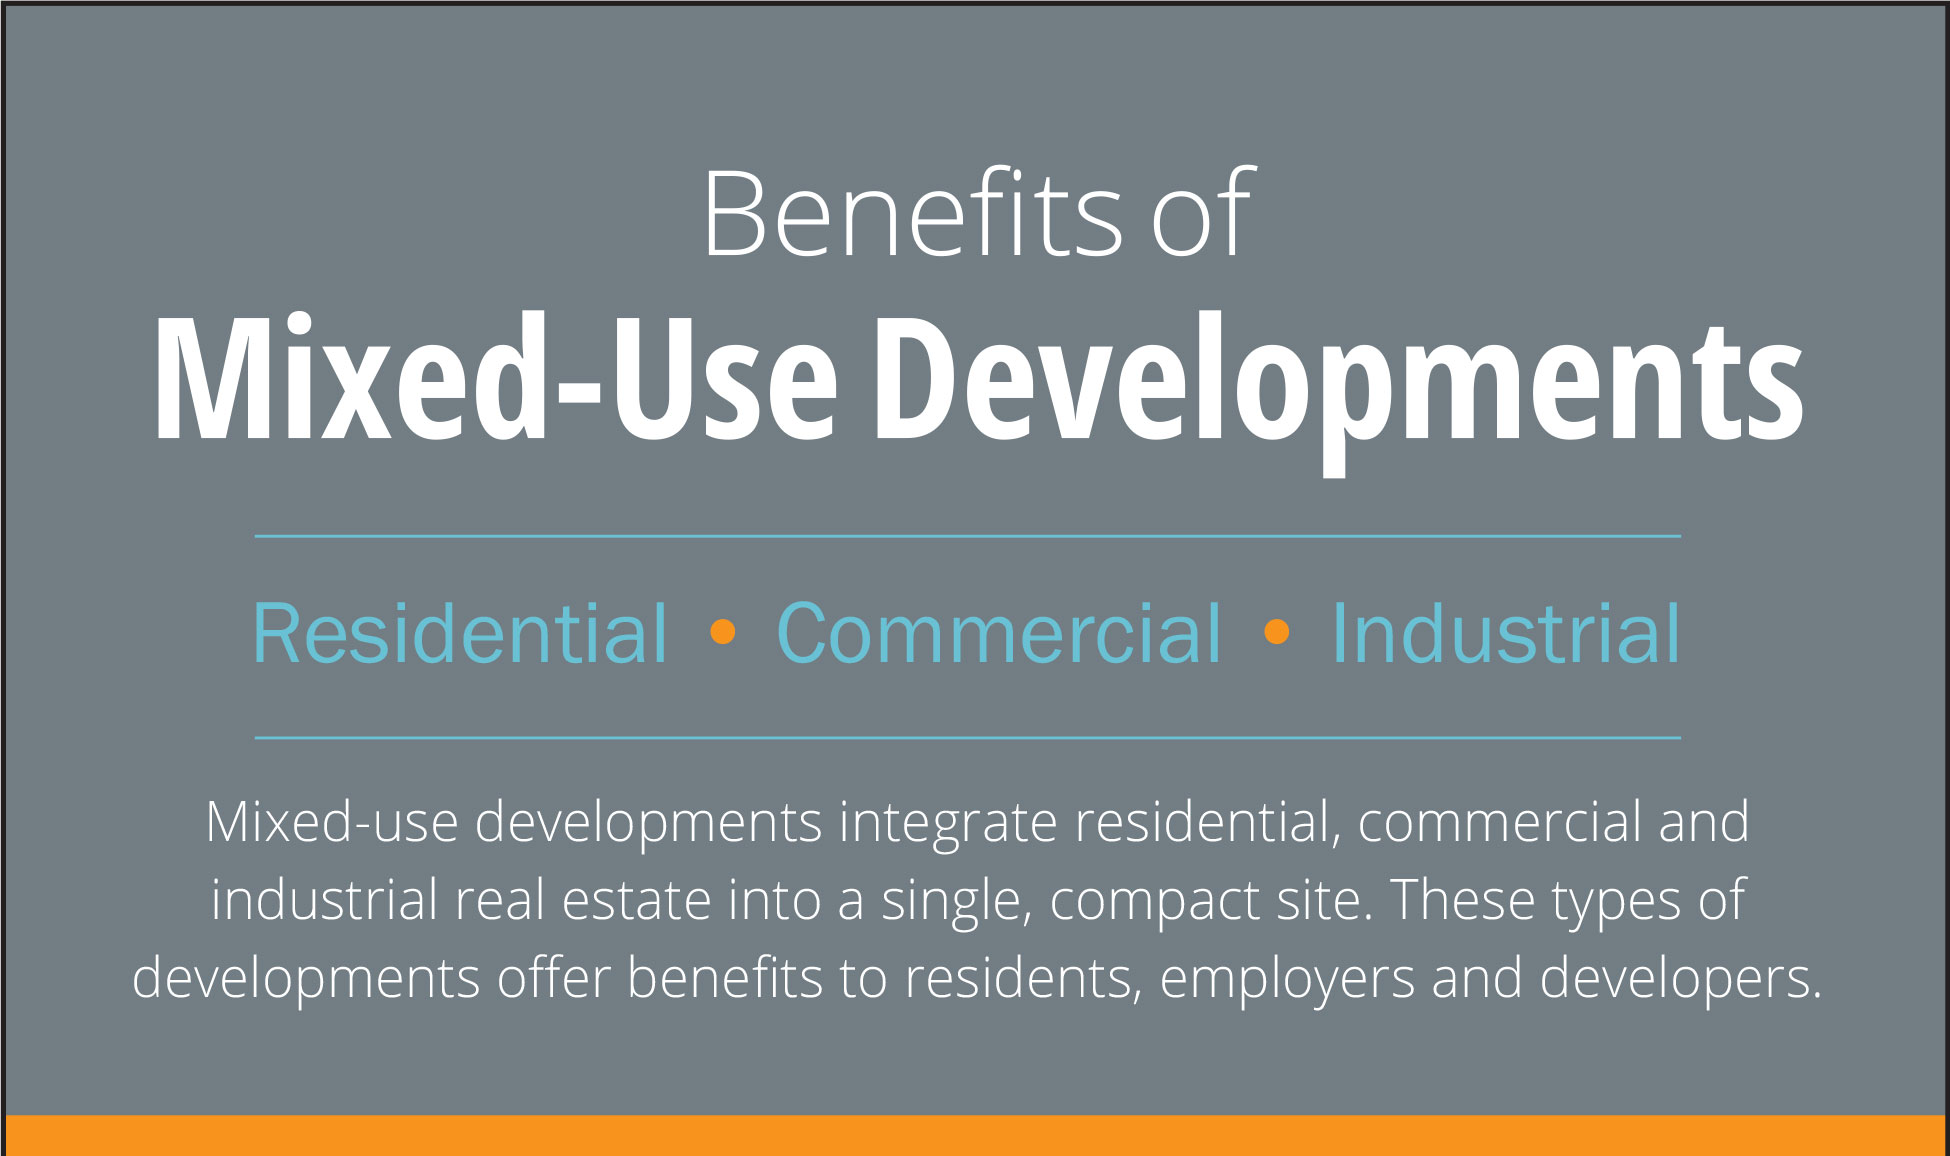 The Benefits of Mixed-Use Developments